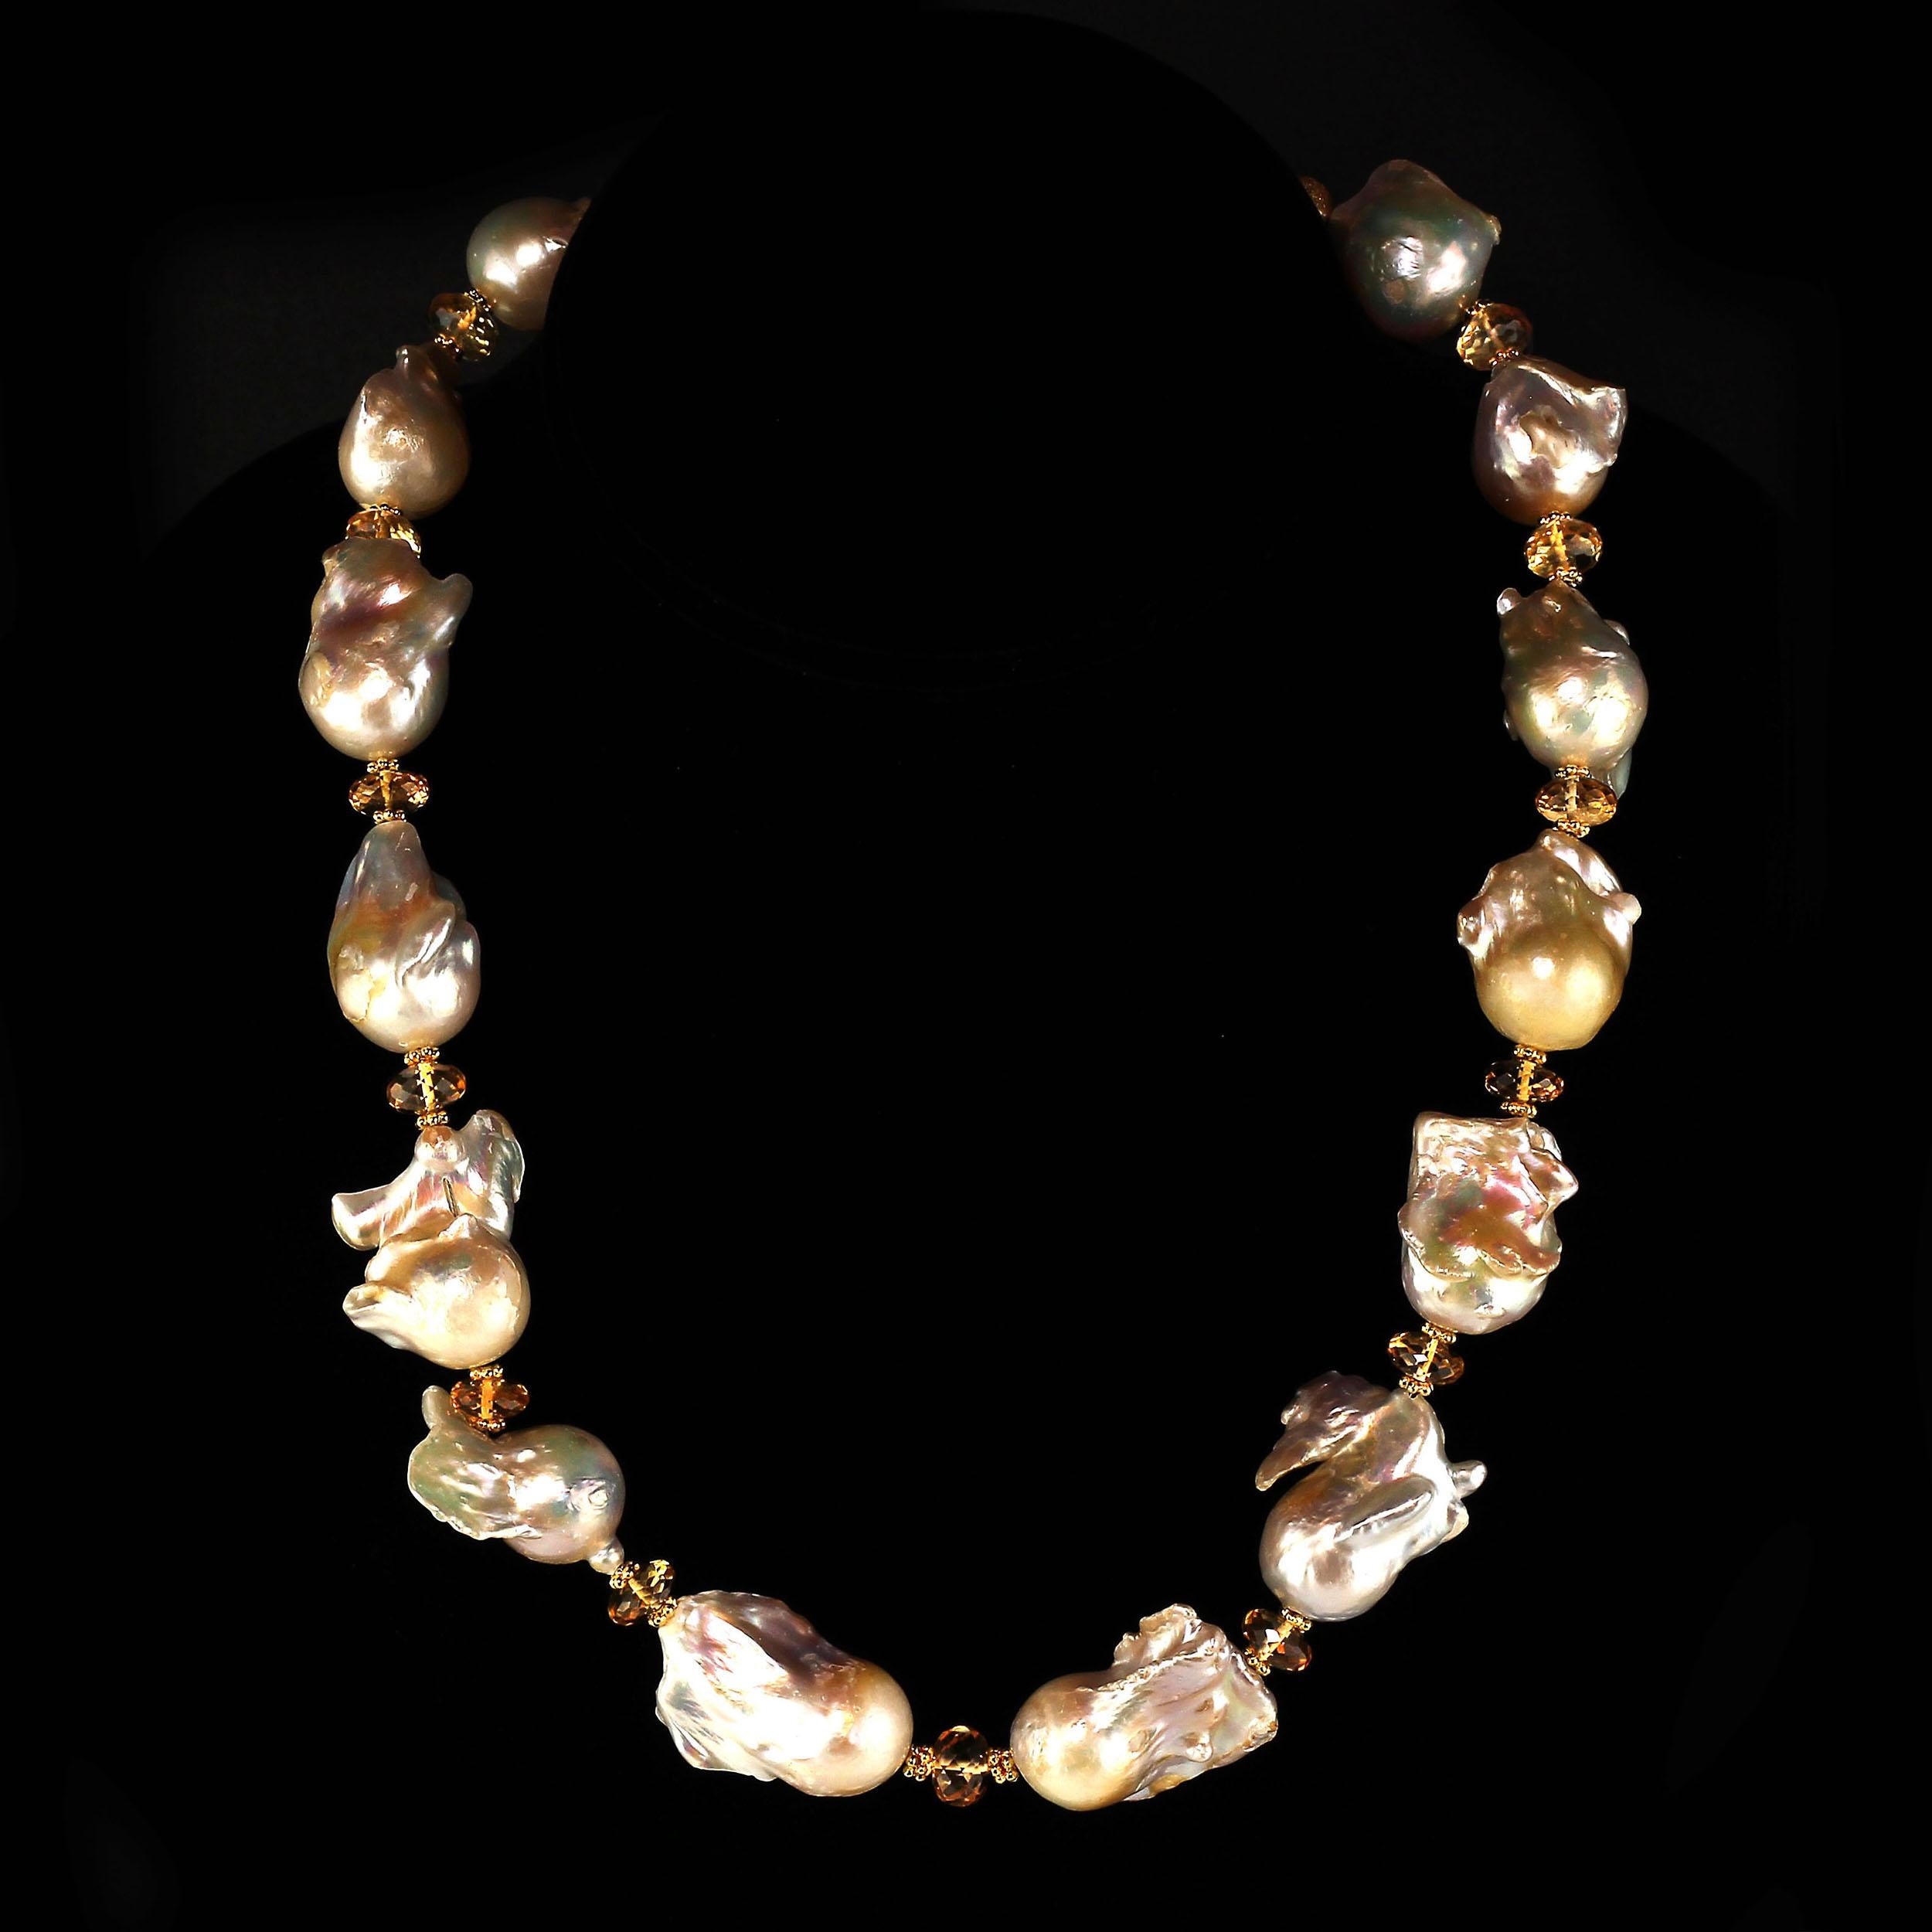 No grit no Pearl

Fireball Pearls are such fun to wear! Just look at those tails. This unique necklace is a showcase for Fireballs, their color is accented by the golden Citrines and gold (22K over copper) daisies. Wear this gorgeous necklace